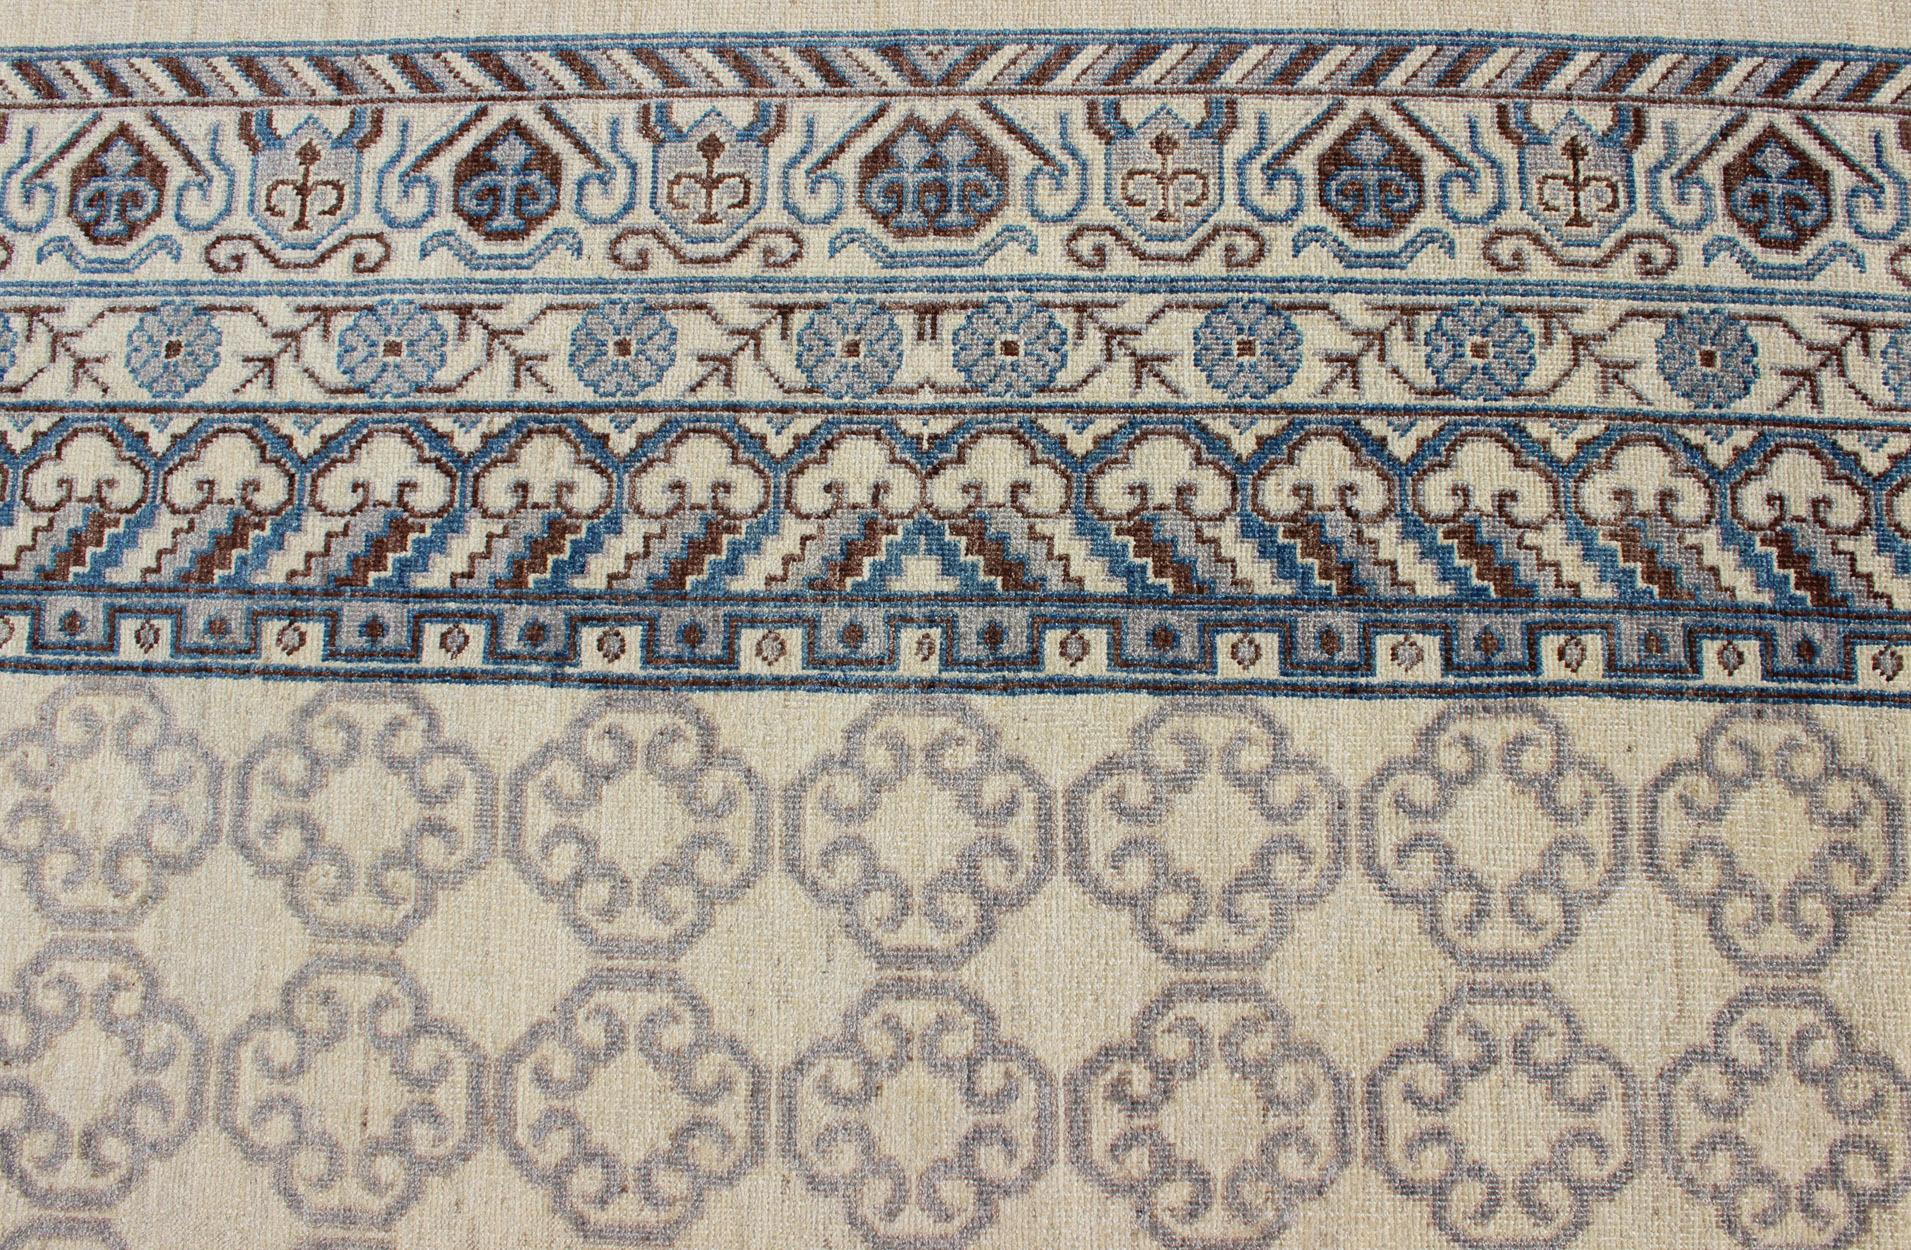 Wool Contemporary Khotan with Geometric Design in Blue, Brown & Cream Colors For Sale